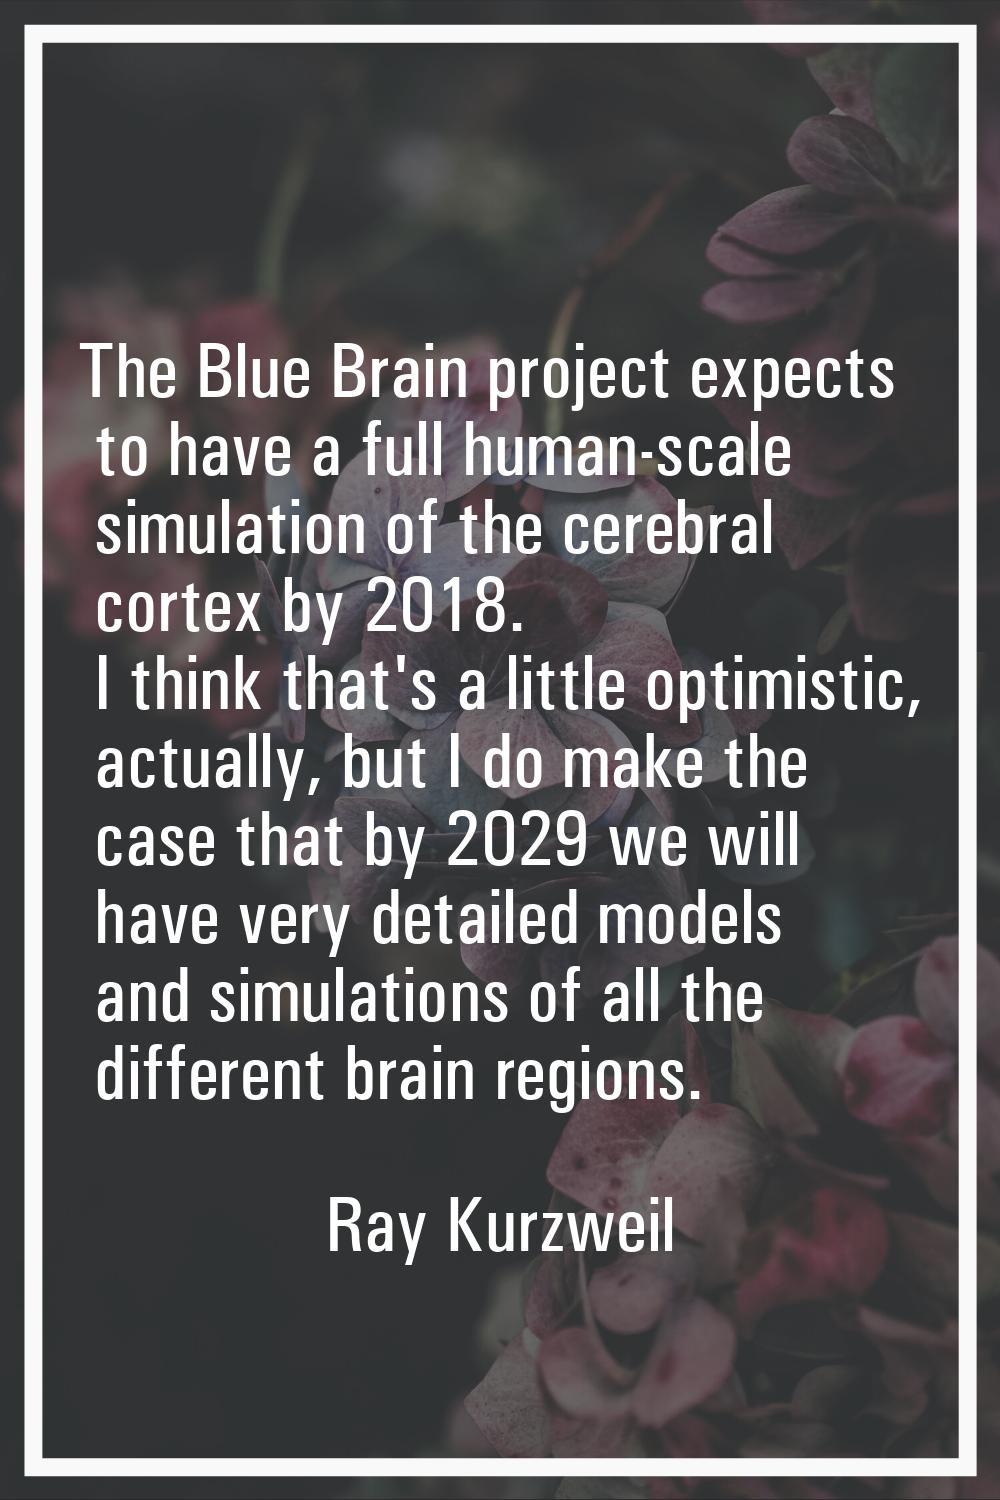 The Blue Brain project expects to have a full human-scale simulation of the cerebral cortex by 2018